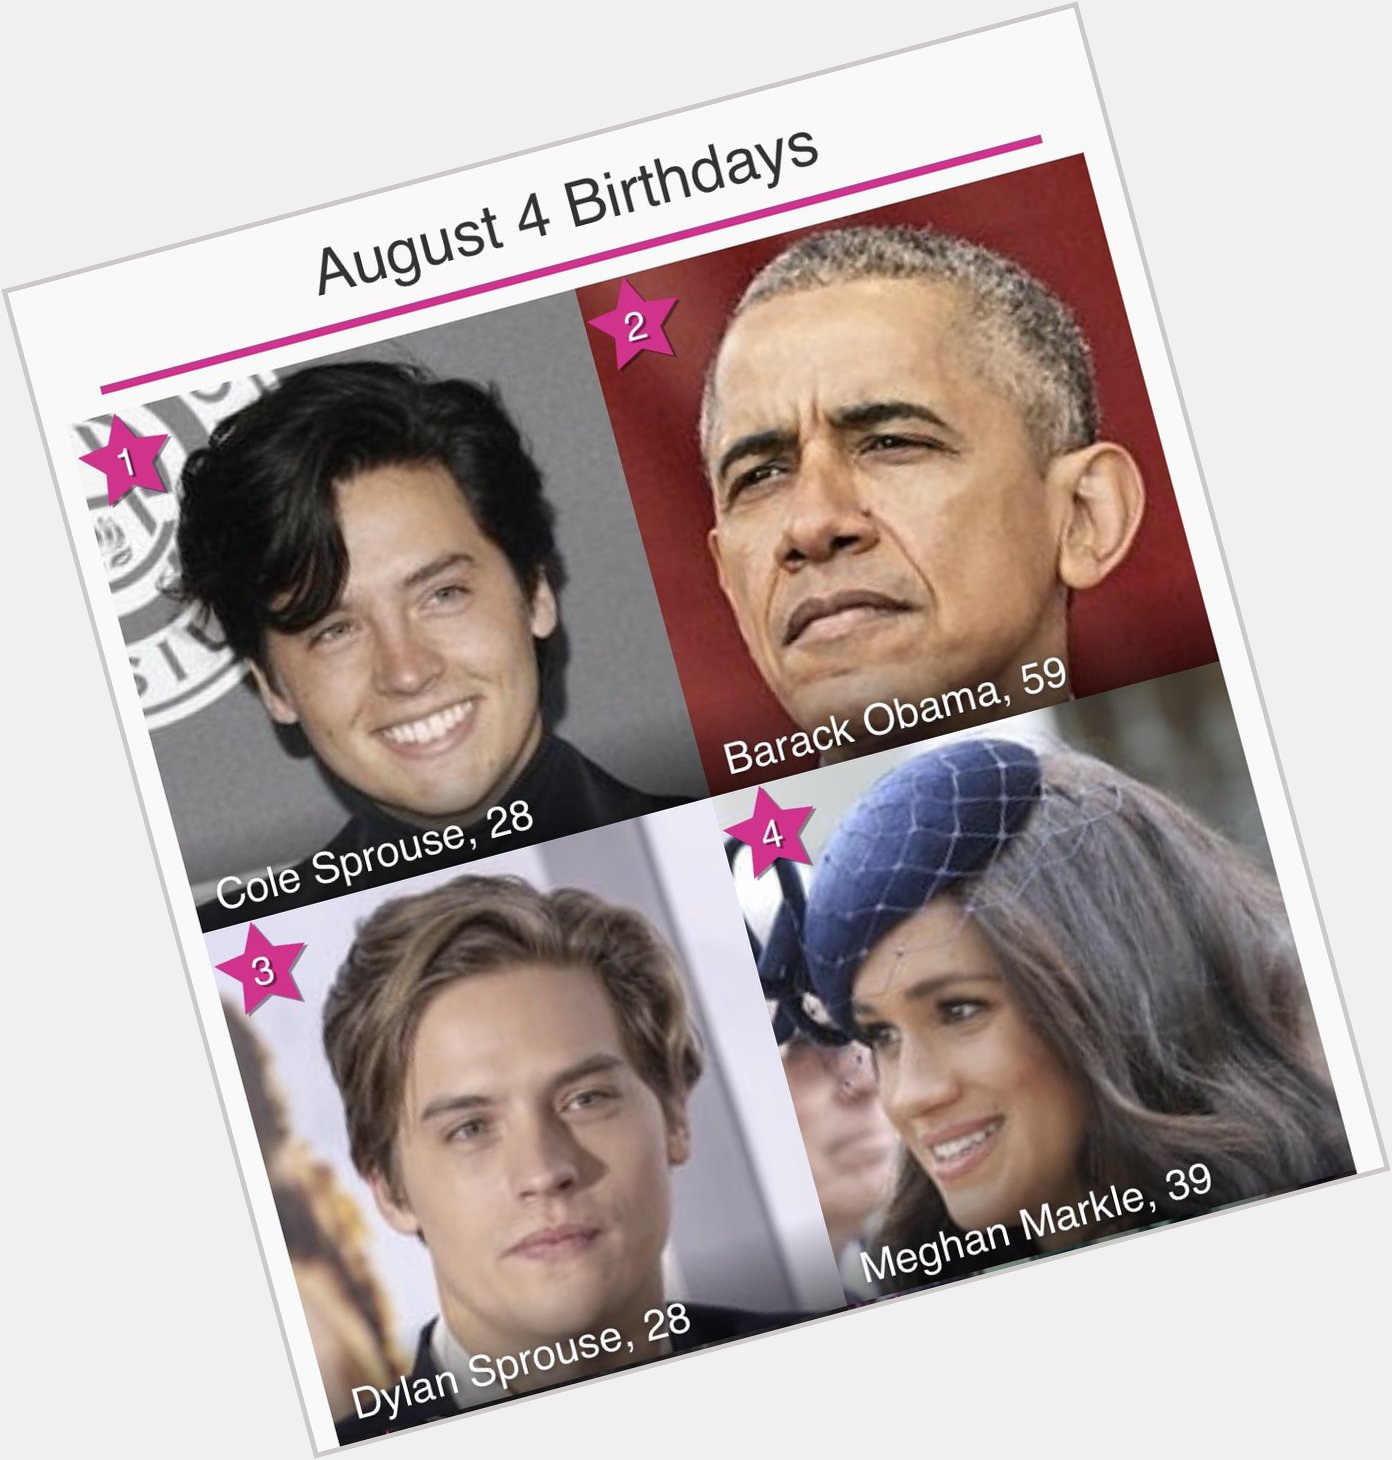 Happy birthday to Cole Sprouse, Barack Obama, Dylan Sprouse, and Meghan Markle in that order! 